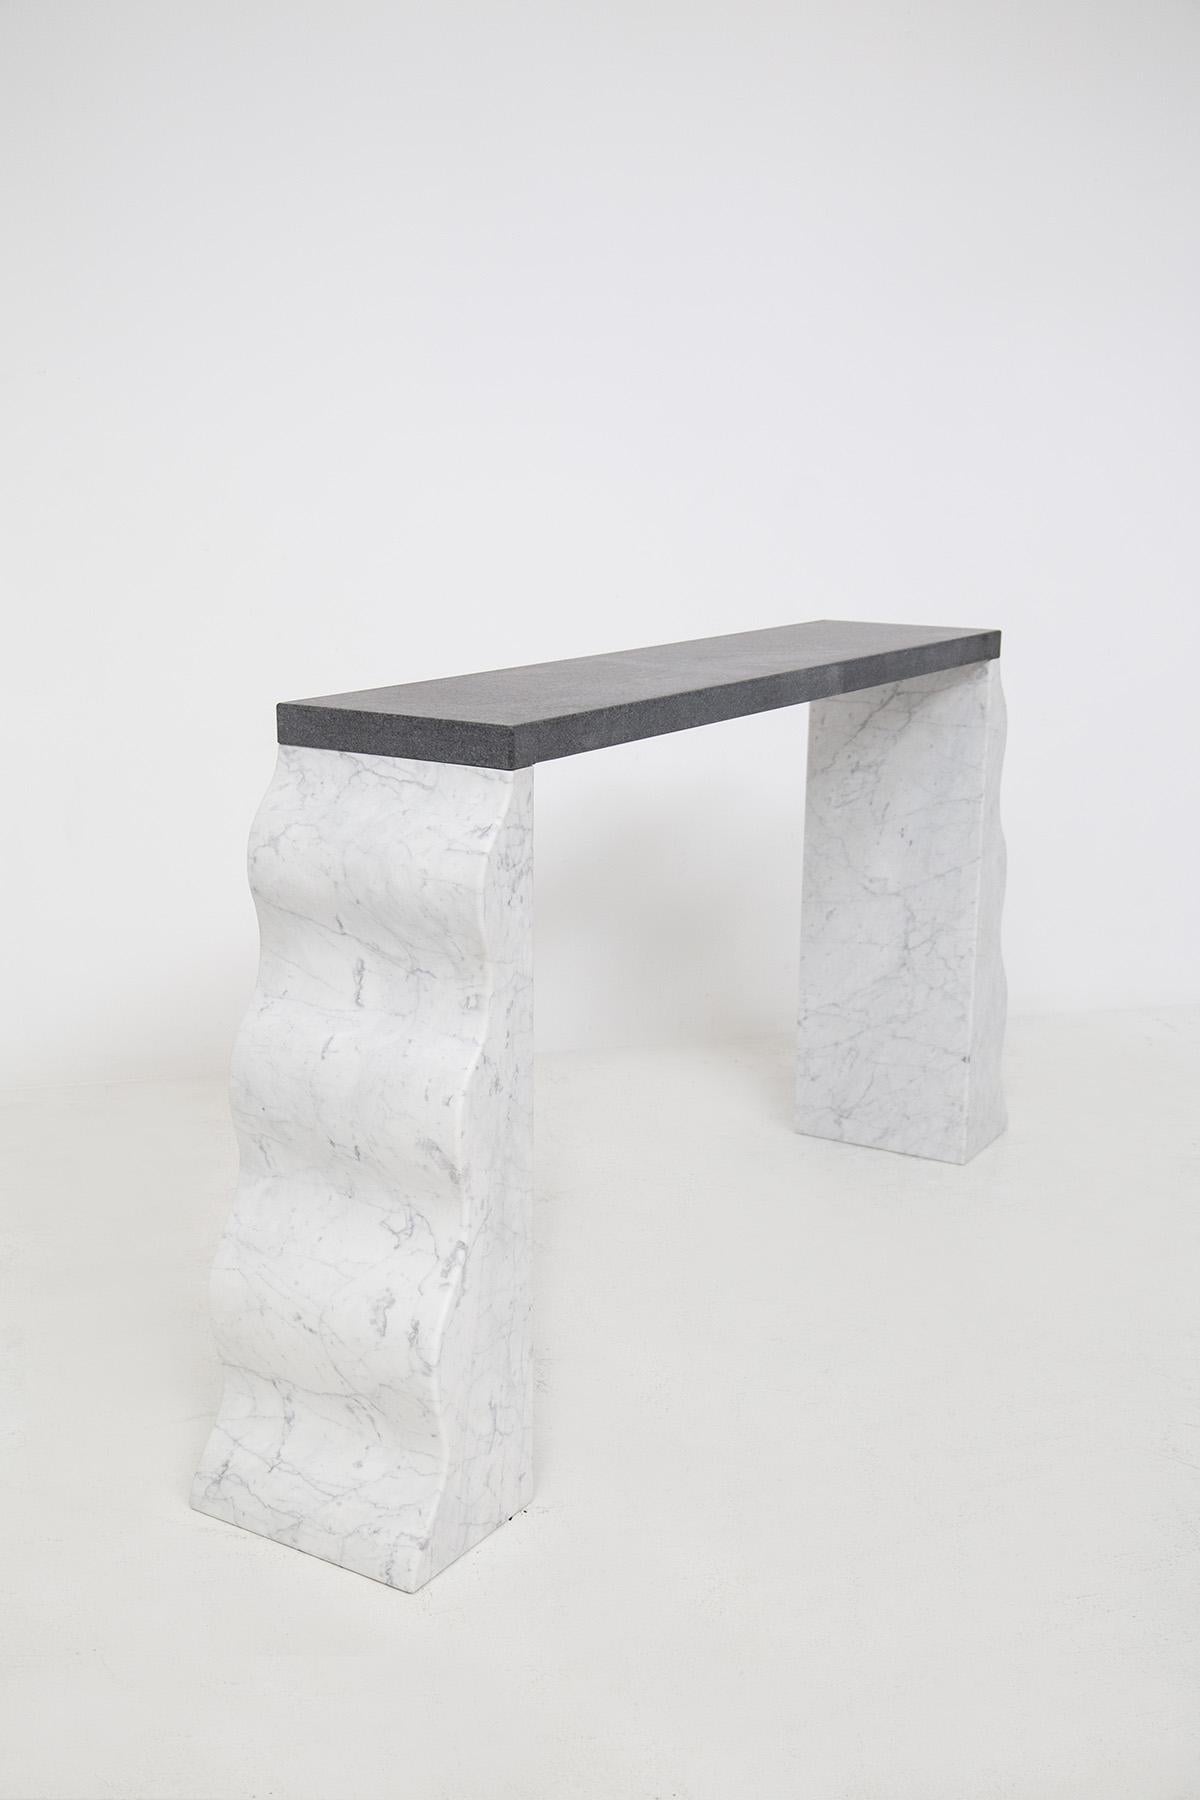 Ettore Sottsass Consolle in White and Black Marble Montenegro 3